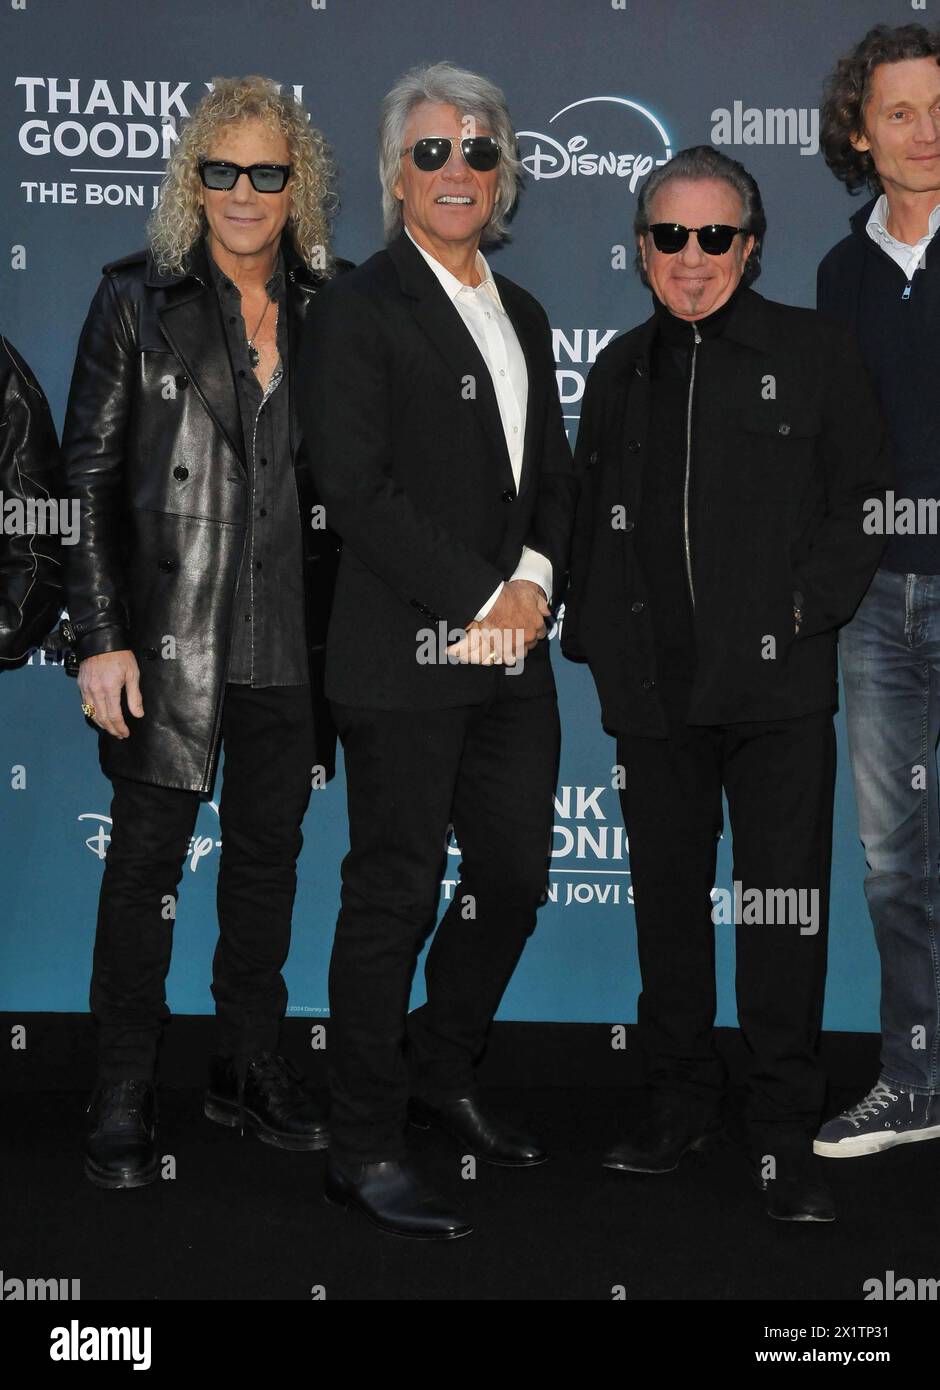 Thank You, Goodnight -The Bon Jovi Story UK TV screening David Bryan, Jon Bon Jovi and Tico Torres at the Thank You, Goodnight: The Bon Jovi Story UK TV screening, Odeon West End, Leicester Square, on Wednesday 17 April 2024 in London, England, UK. CAP/CAN CAN/ London UK Great Britain Copyright: xCanxNguyen/CapitalxPicturesx Stock Photo